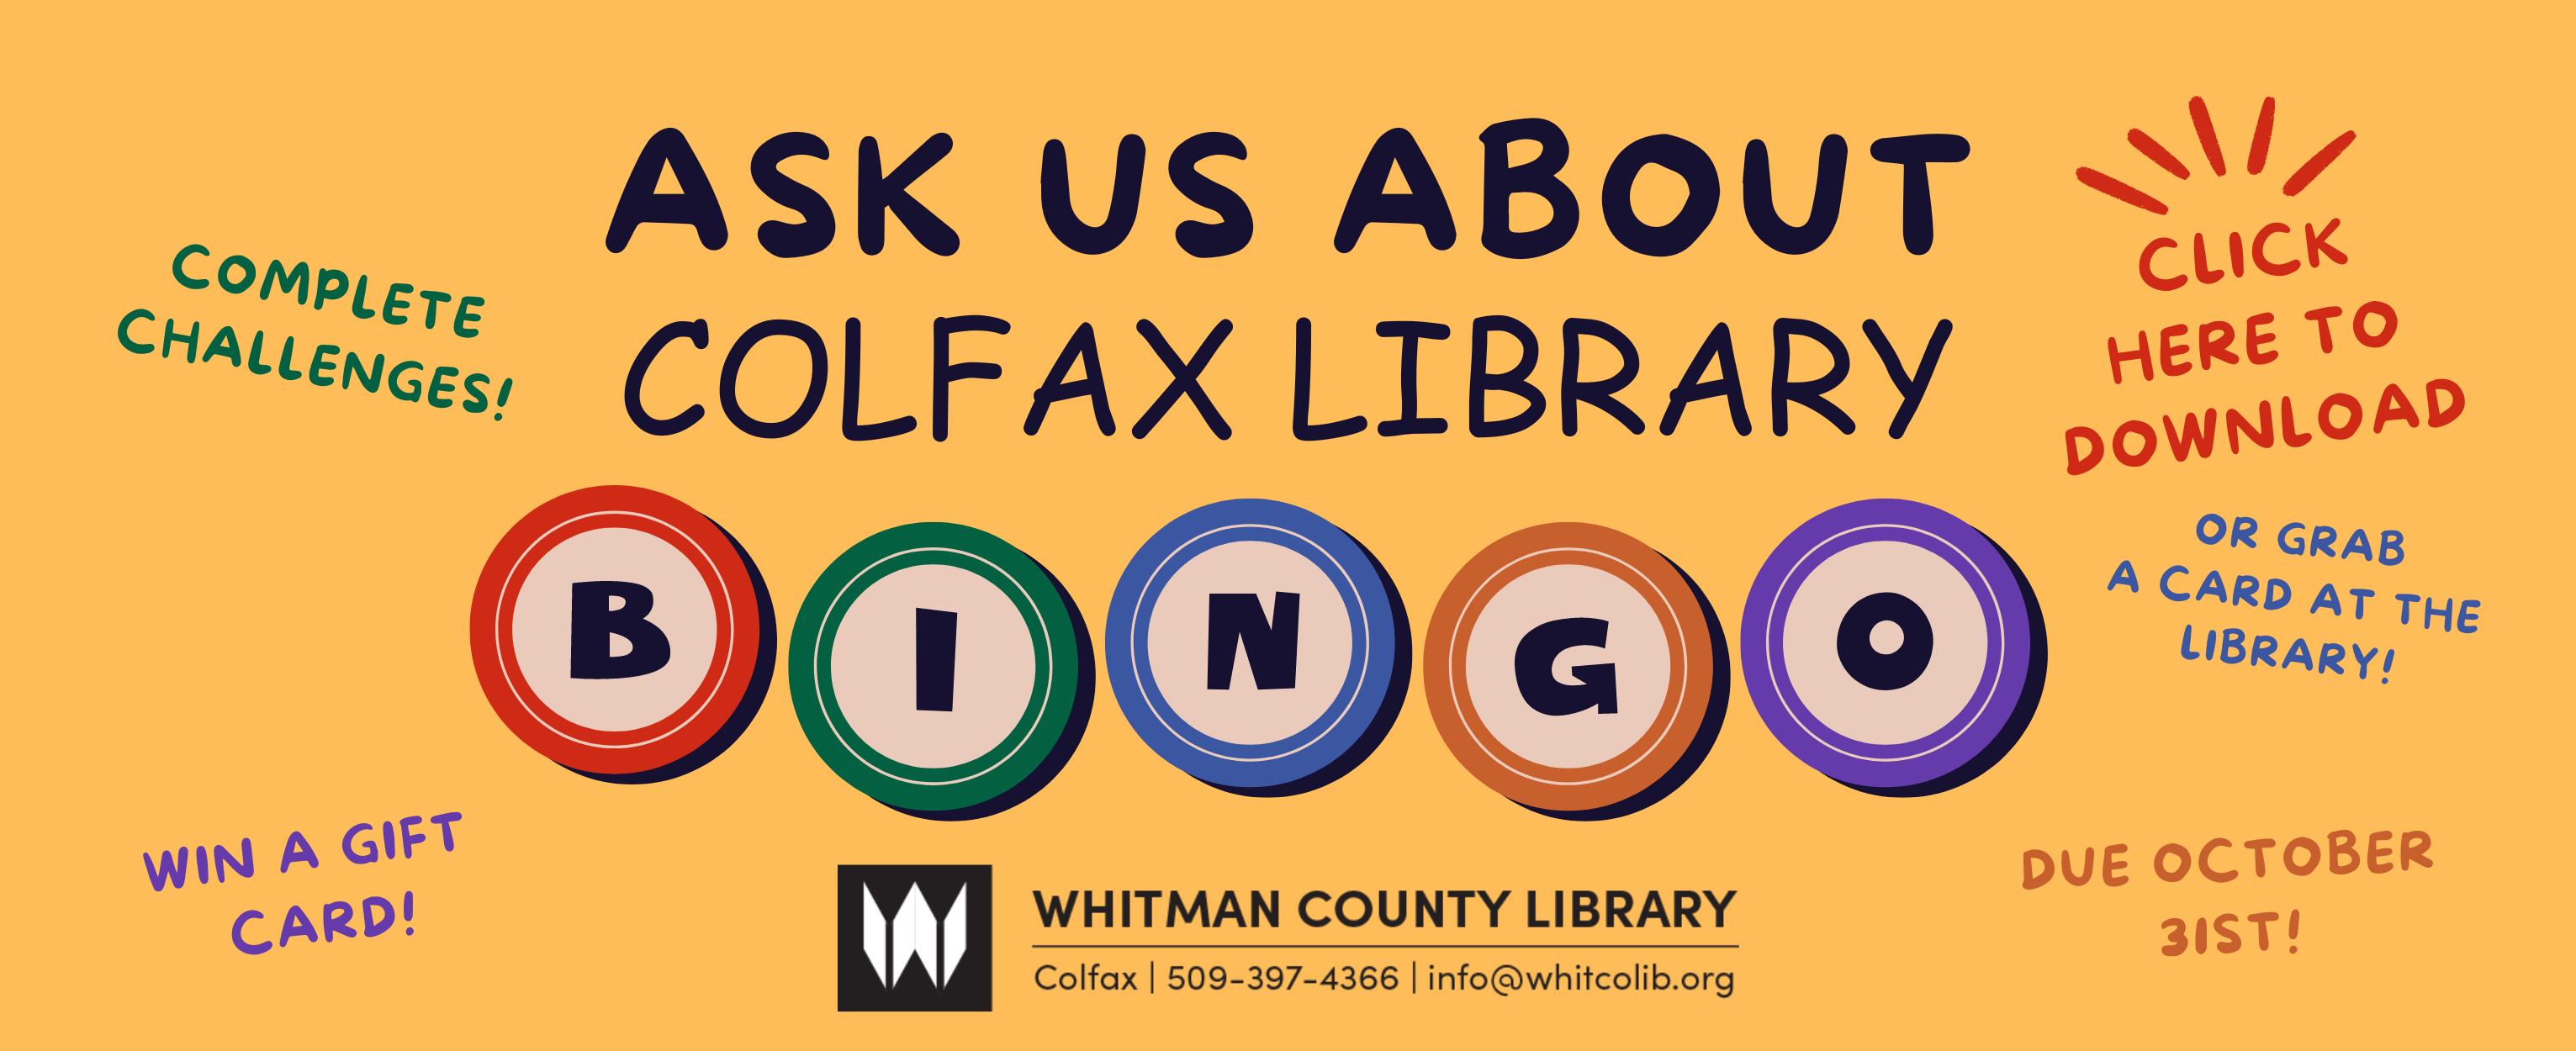 Ask us about Colfax Library Bingo! Click here for a printable version or pick up a card from the library.